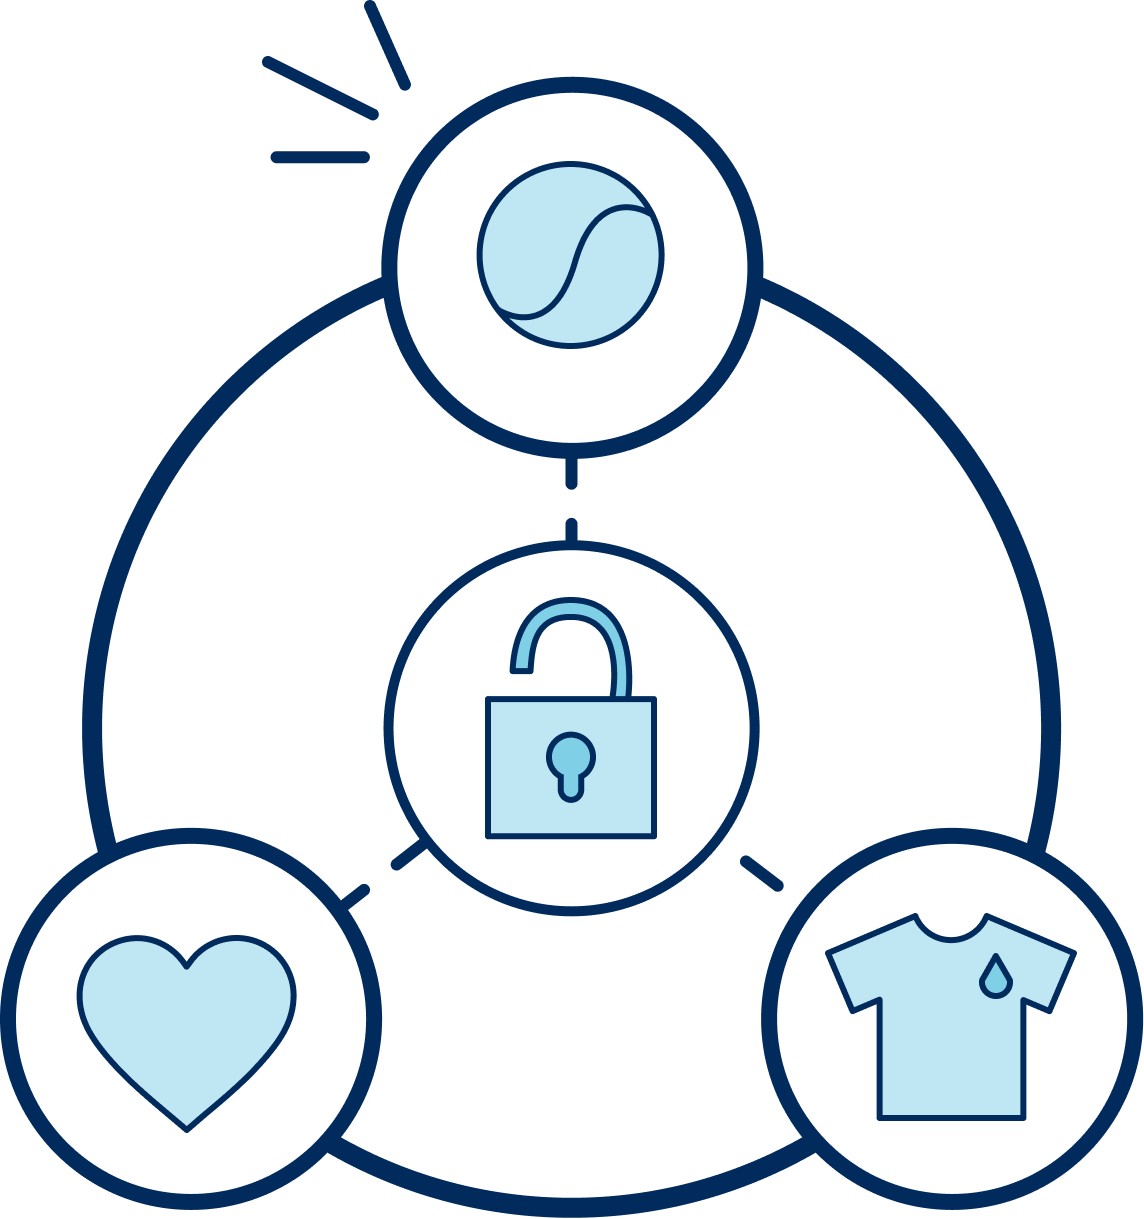 A circle with an open lock in the middle, surrounded by three circles with a heart, a ball, and a t-shirt